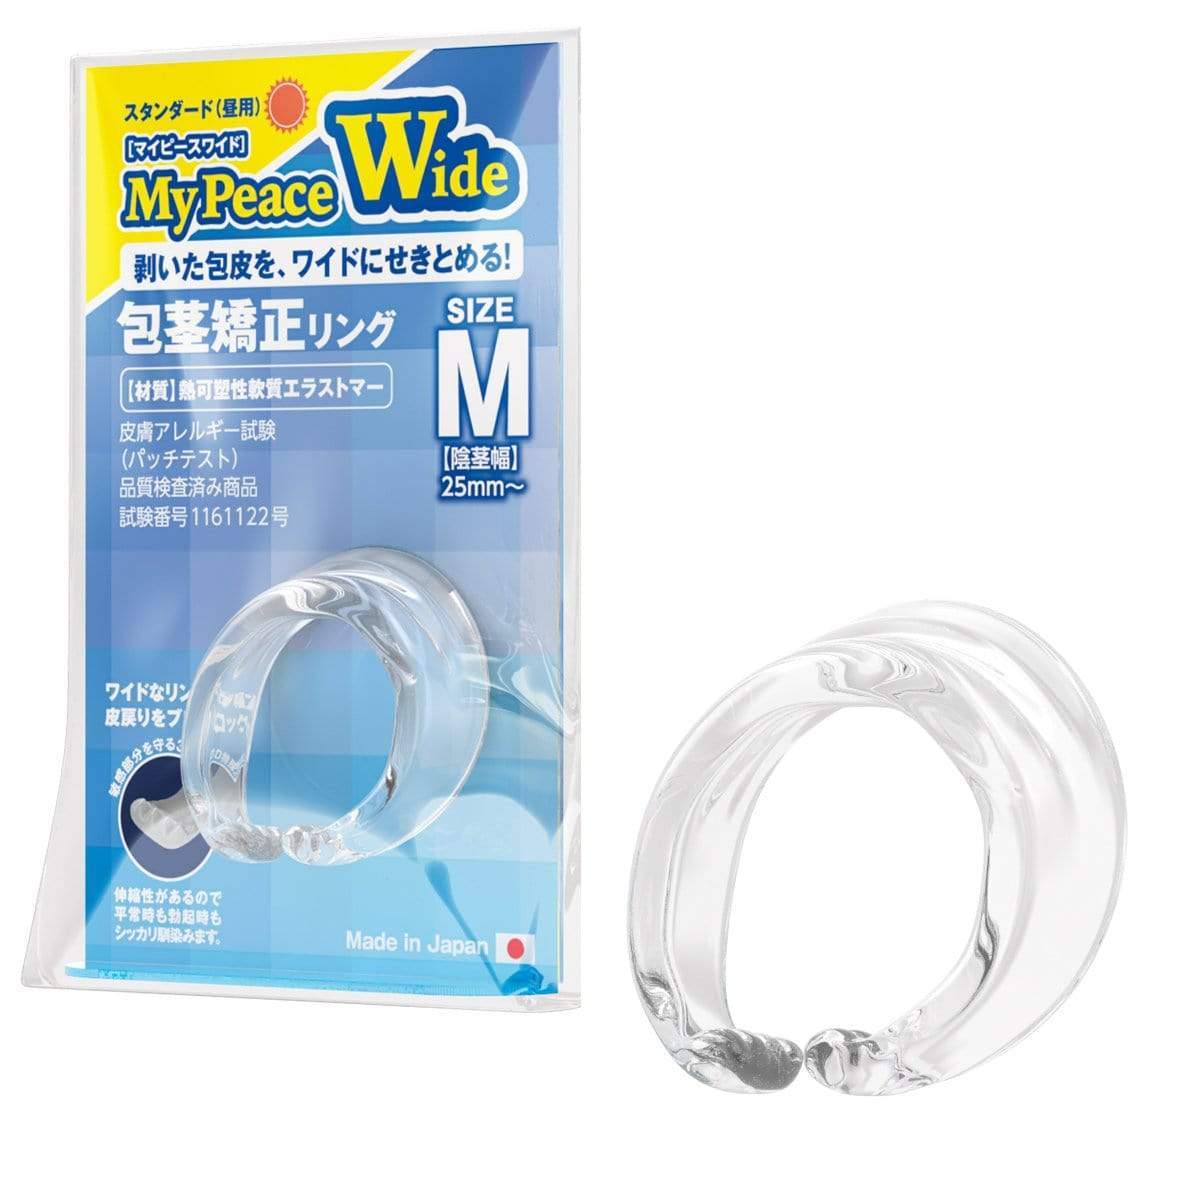 SSI Japan - My Peace Wide Standard Day Size M Correction Cock Ring (Clear) Cock Ring (Non Vibration) 4582137934107 CherryAffairs